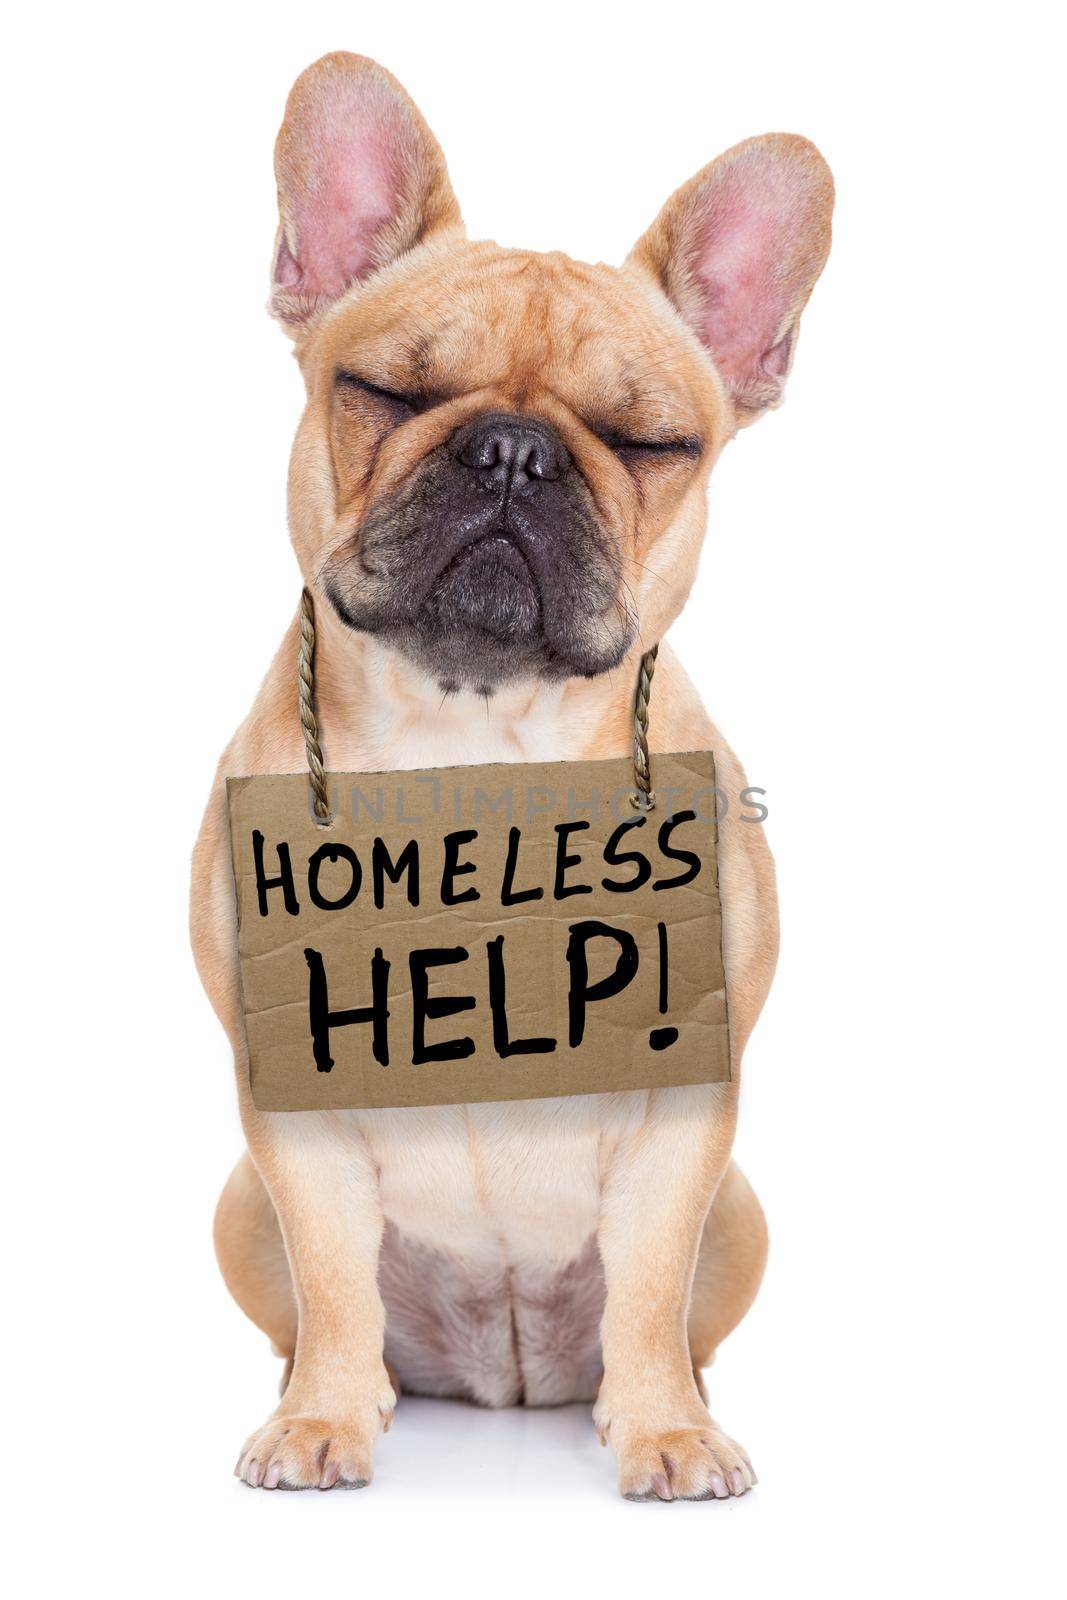 lost,homeless french bulldog with cardboard hanging around neck, isolated on white background, eyes closed and looking very sad